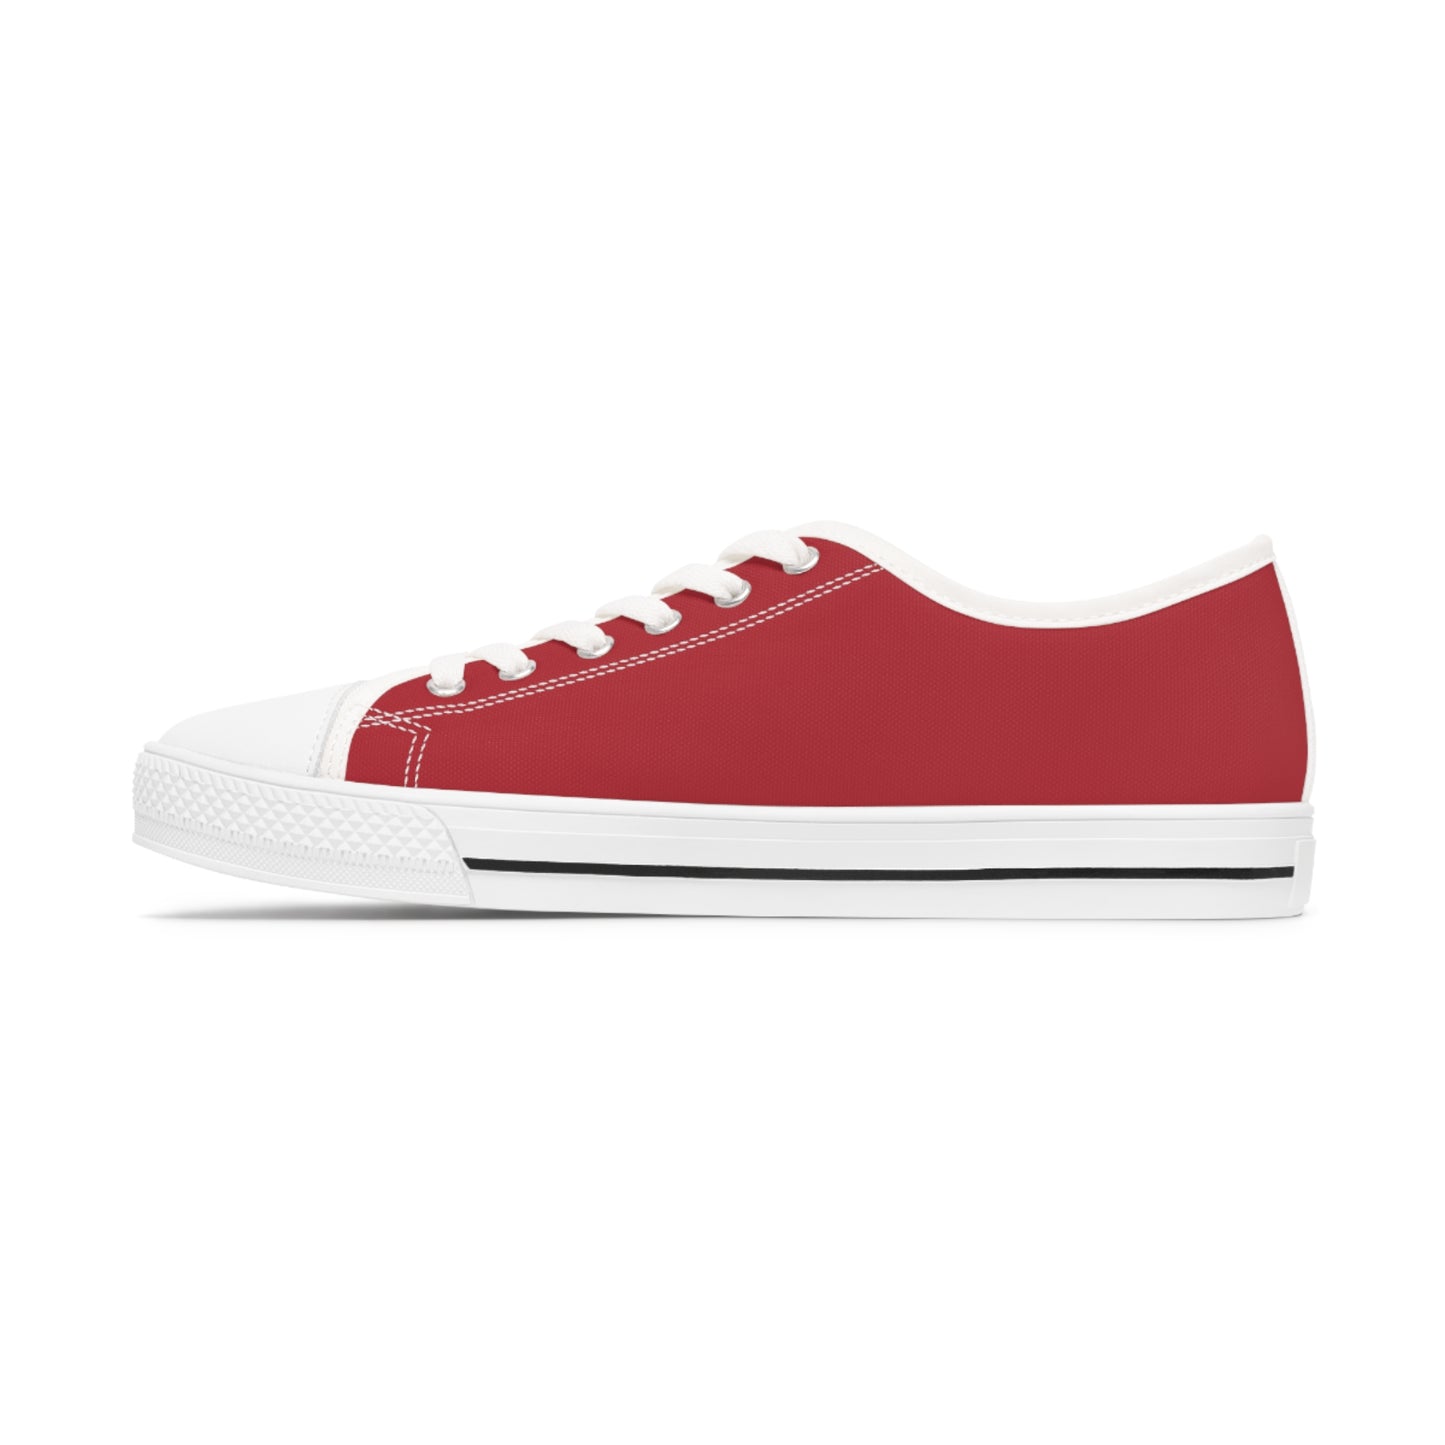 Women's Low Top Sneakers - Red US 12 White sole